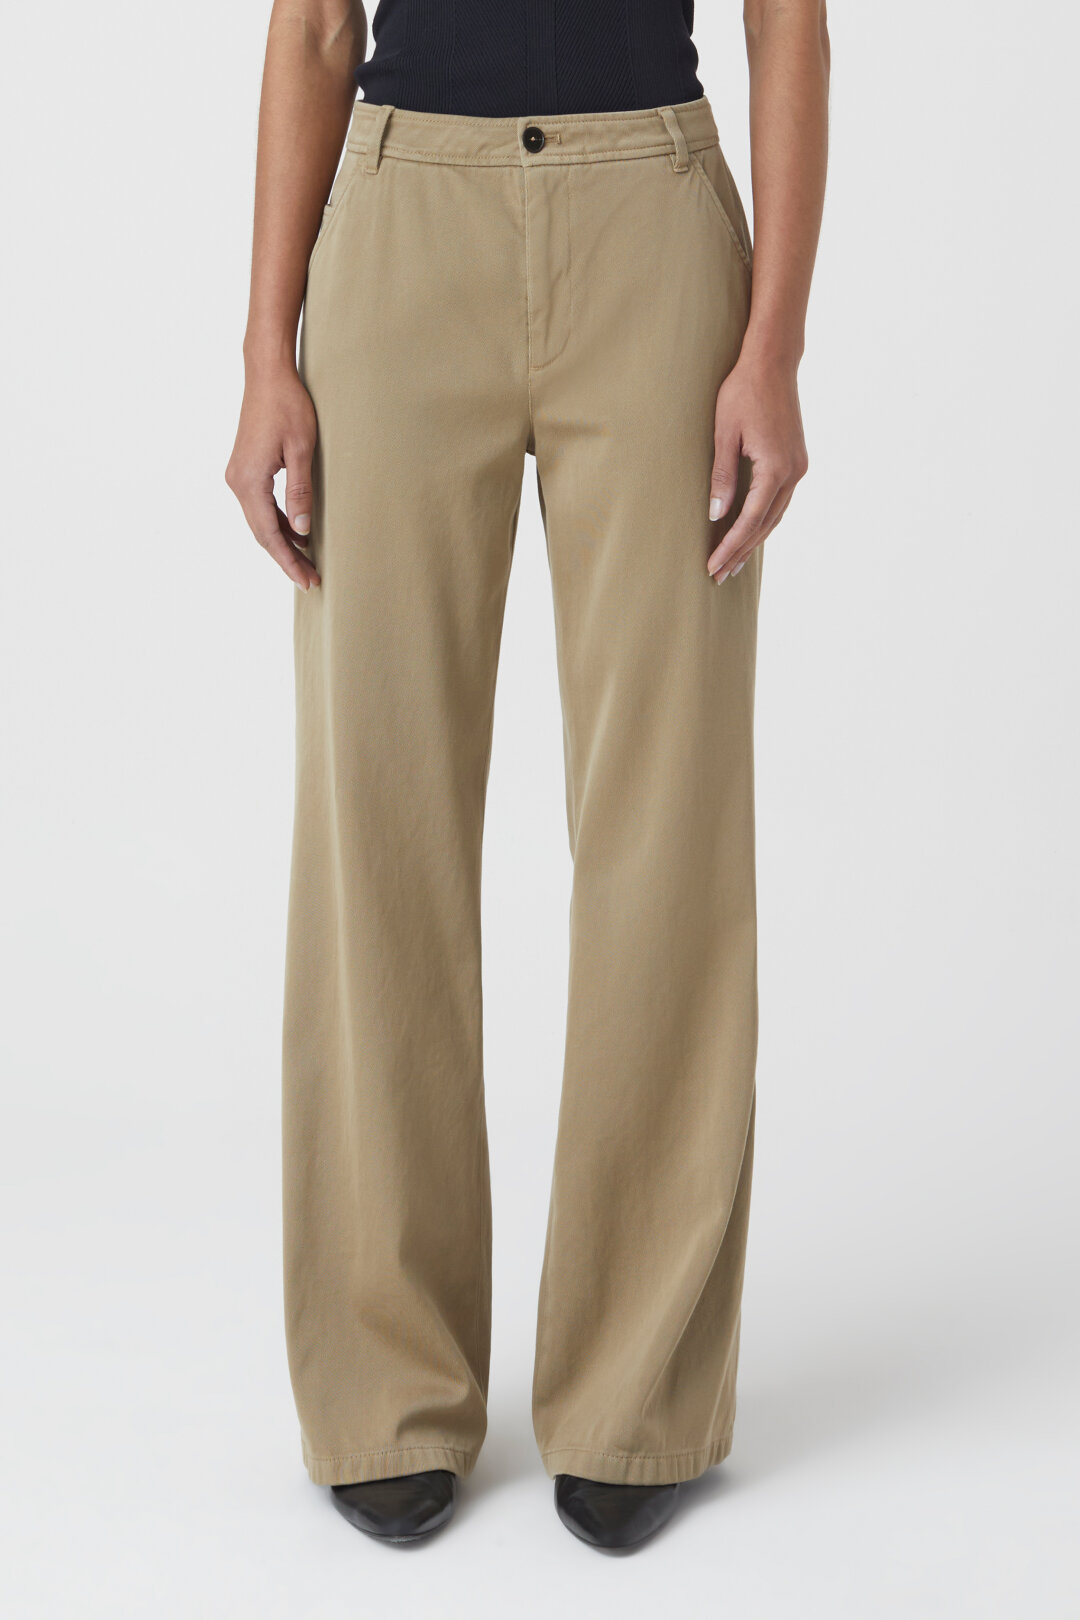 CLOSED Cholet Trouser in Camel